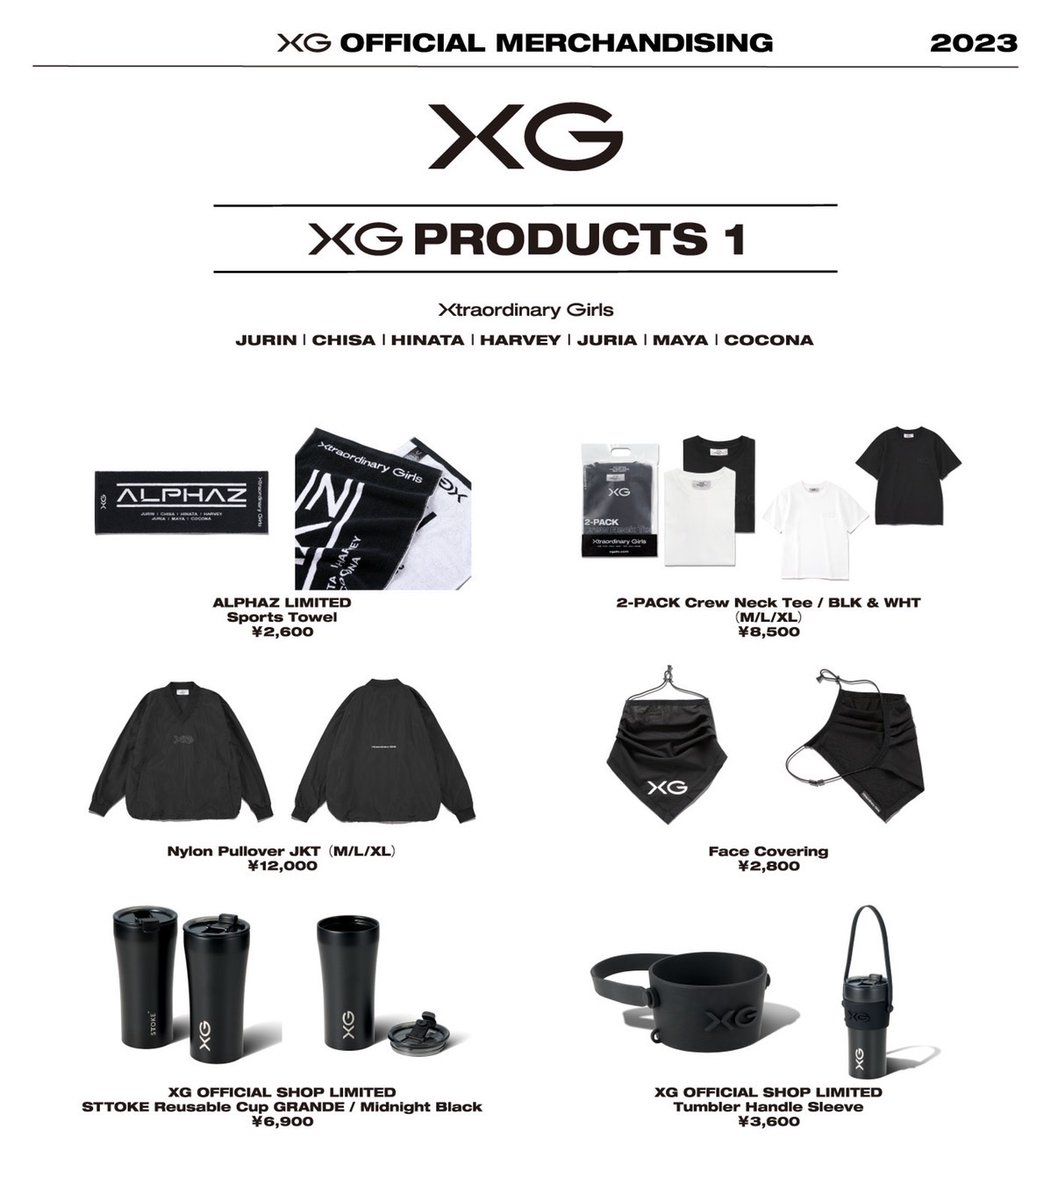 Image for Join ALPHAZ, the official XG fanclub to get early access to merchandise as well as exclusive news, blogs, vlogs, and more! You'll also get to chat with XG!! Click the link to sign up now 💫 XG OFFICIAL FANCLUB "ALPHAZ" https://t.co/p6gnwlIsYj XG ALPHAZ XGALX https://t.co/mRaaq8wQPW